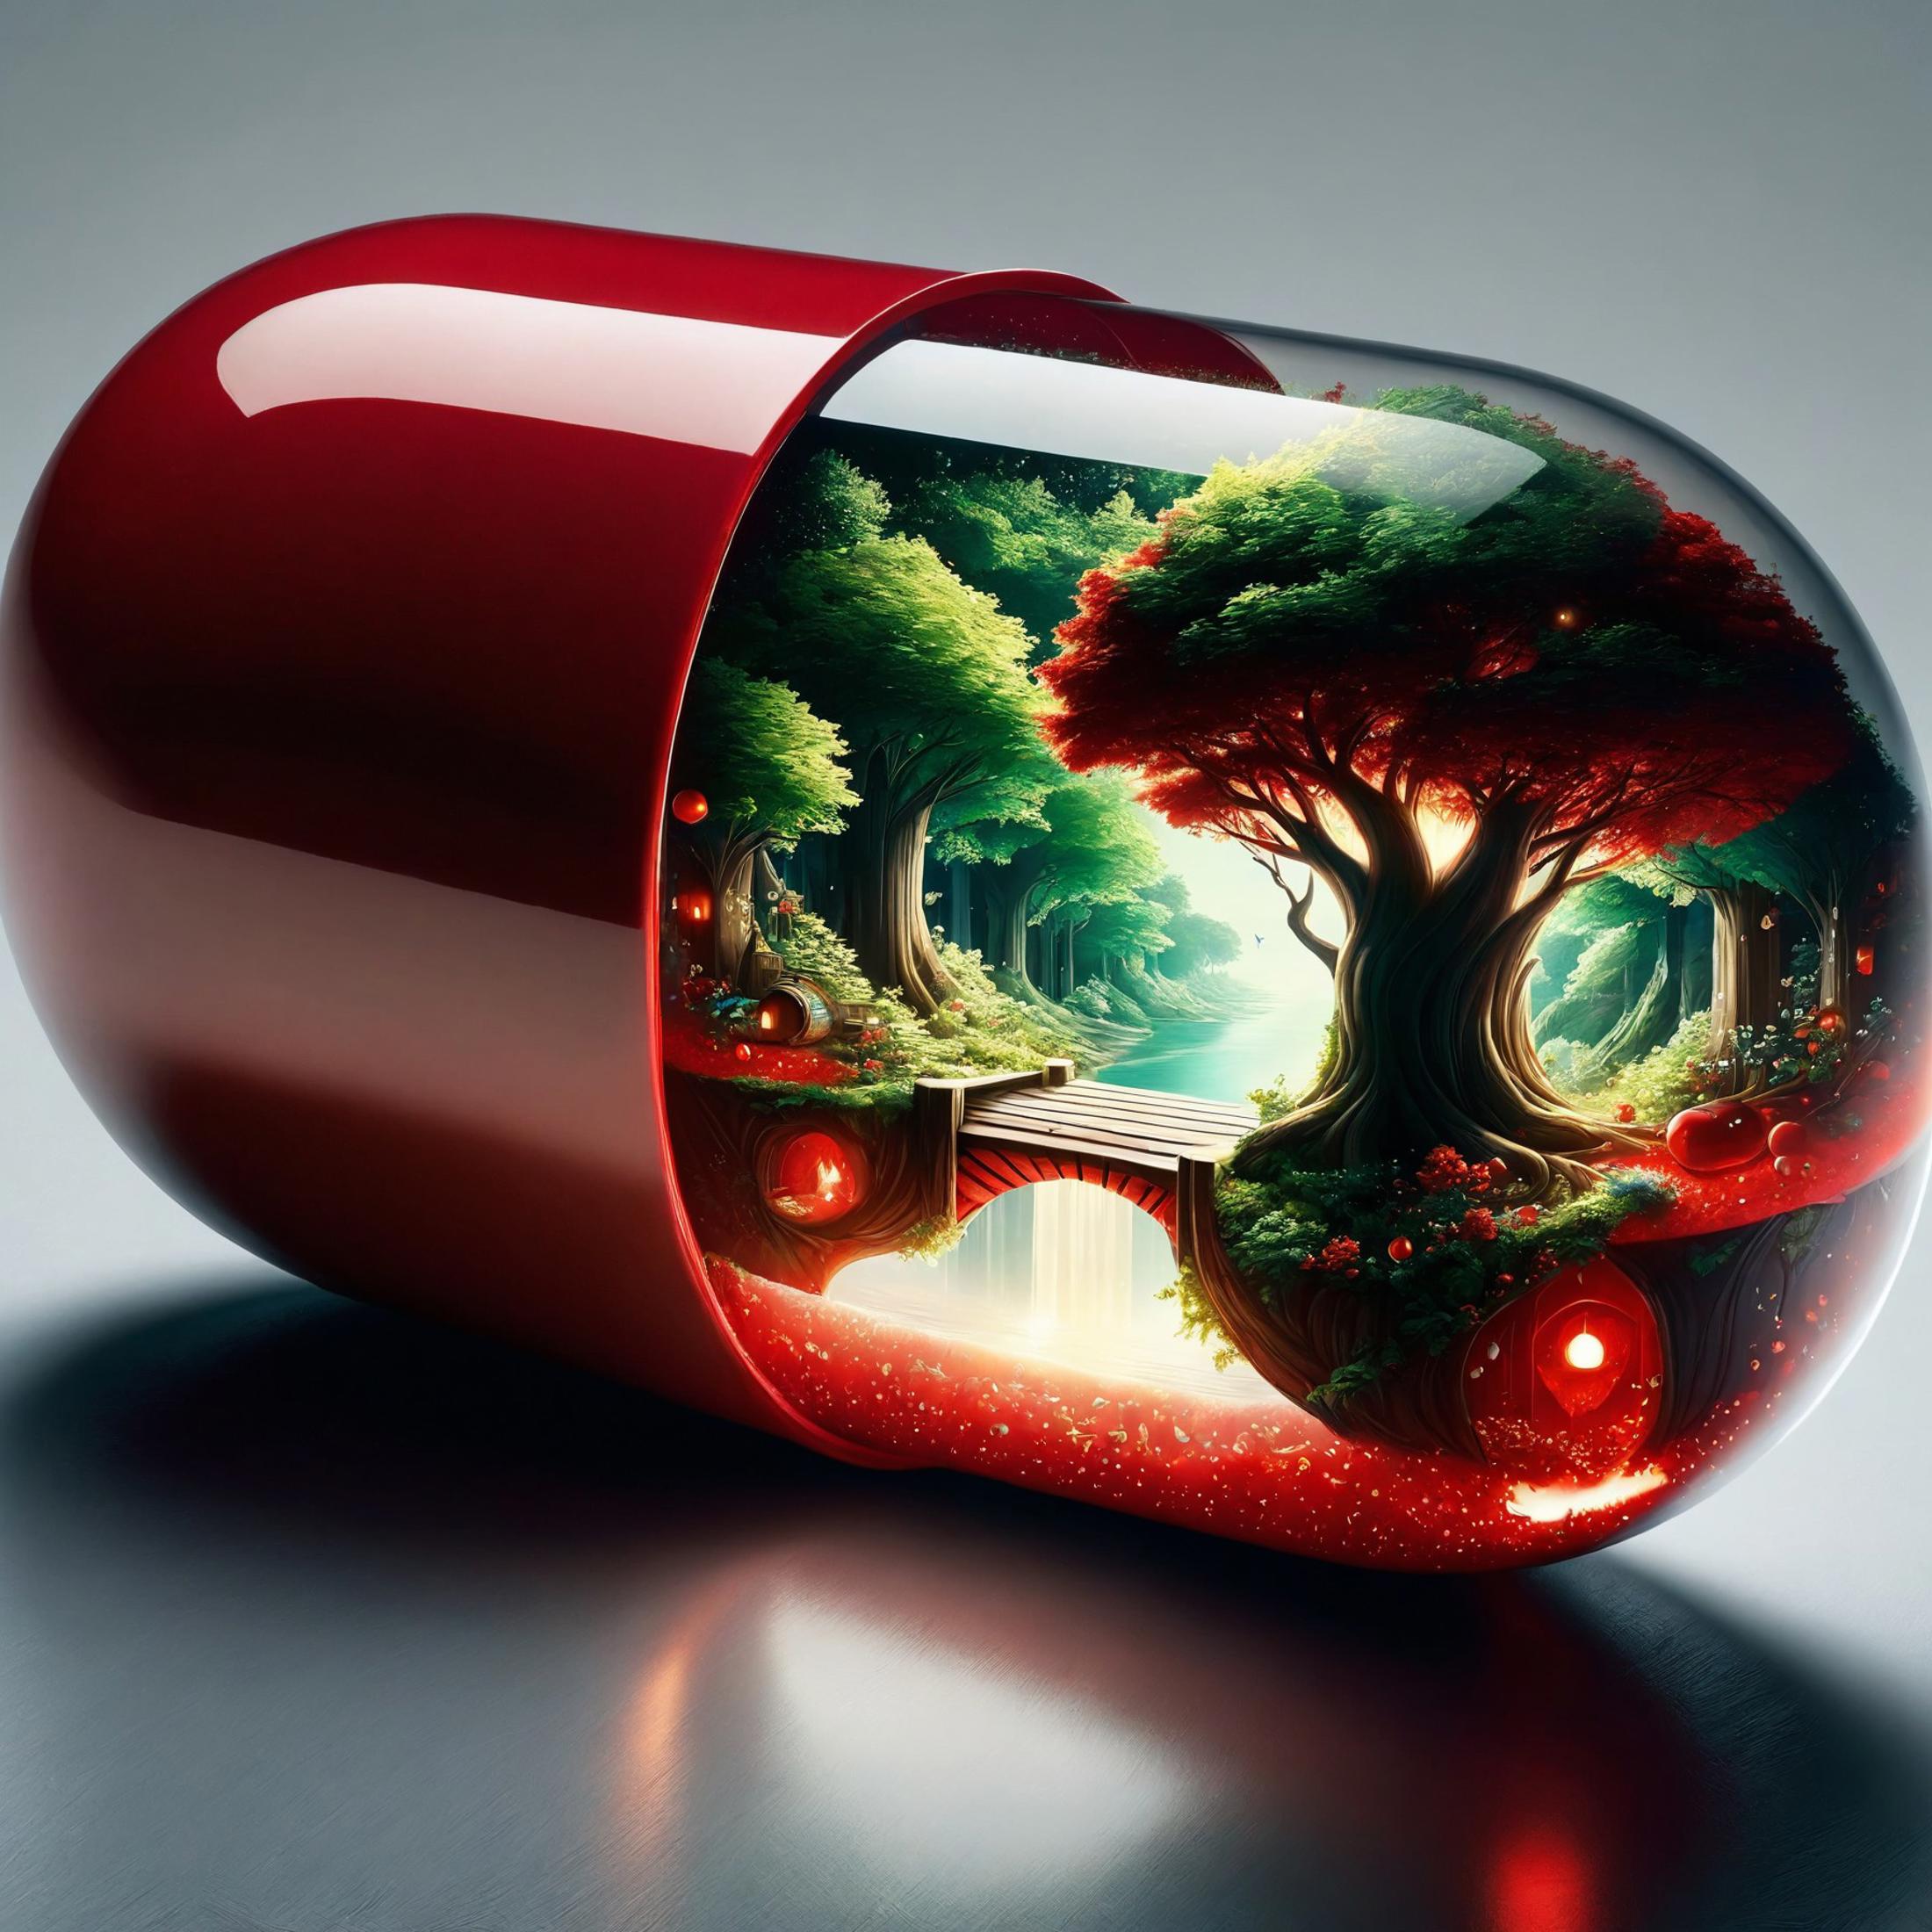 A red pill bottle with a forest scene inside.